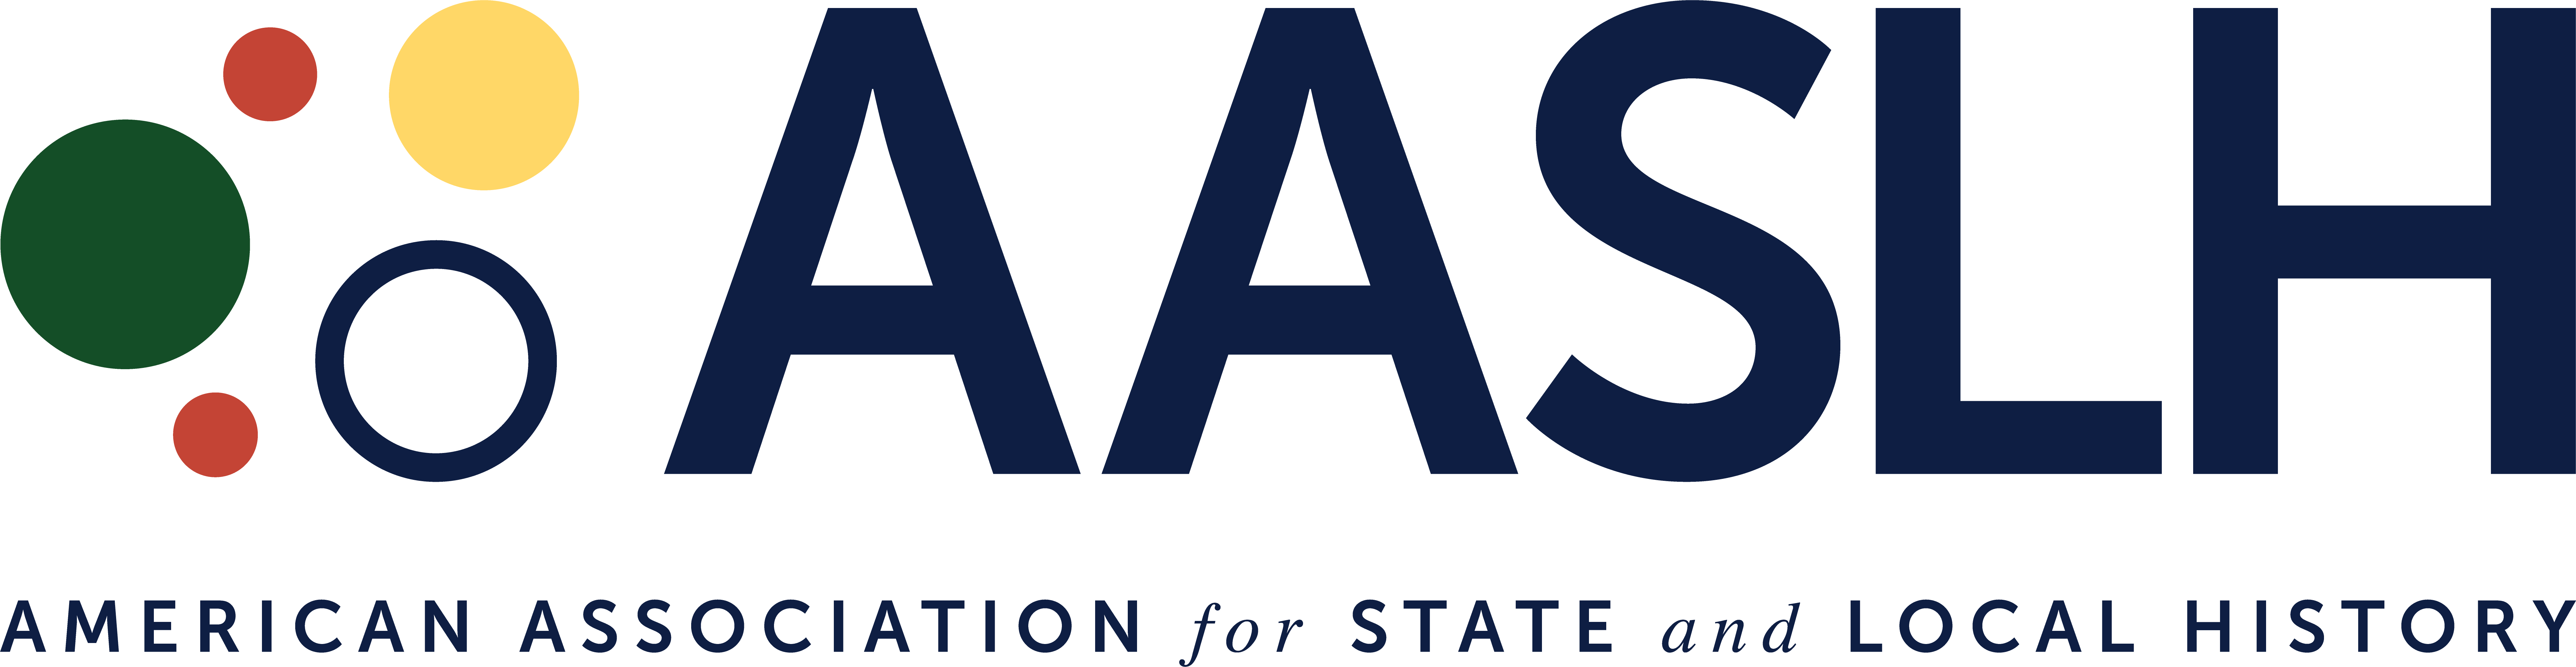 American Association of State and Local History